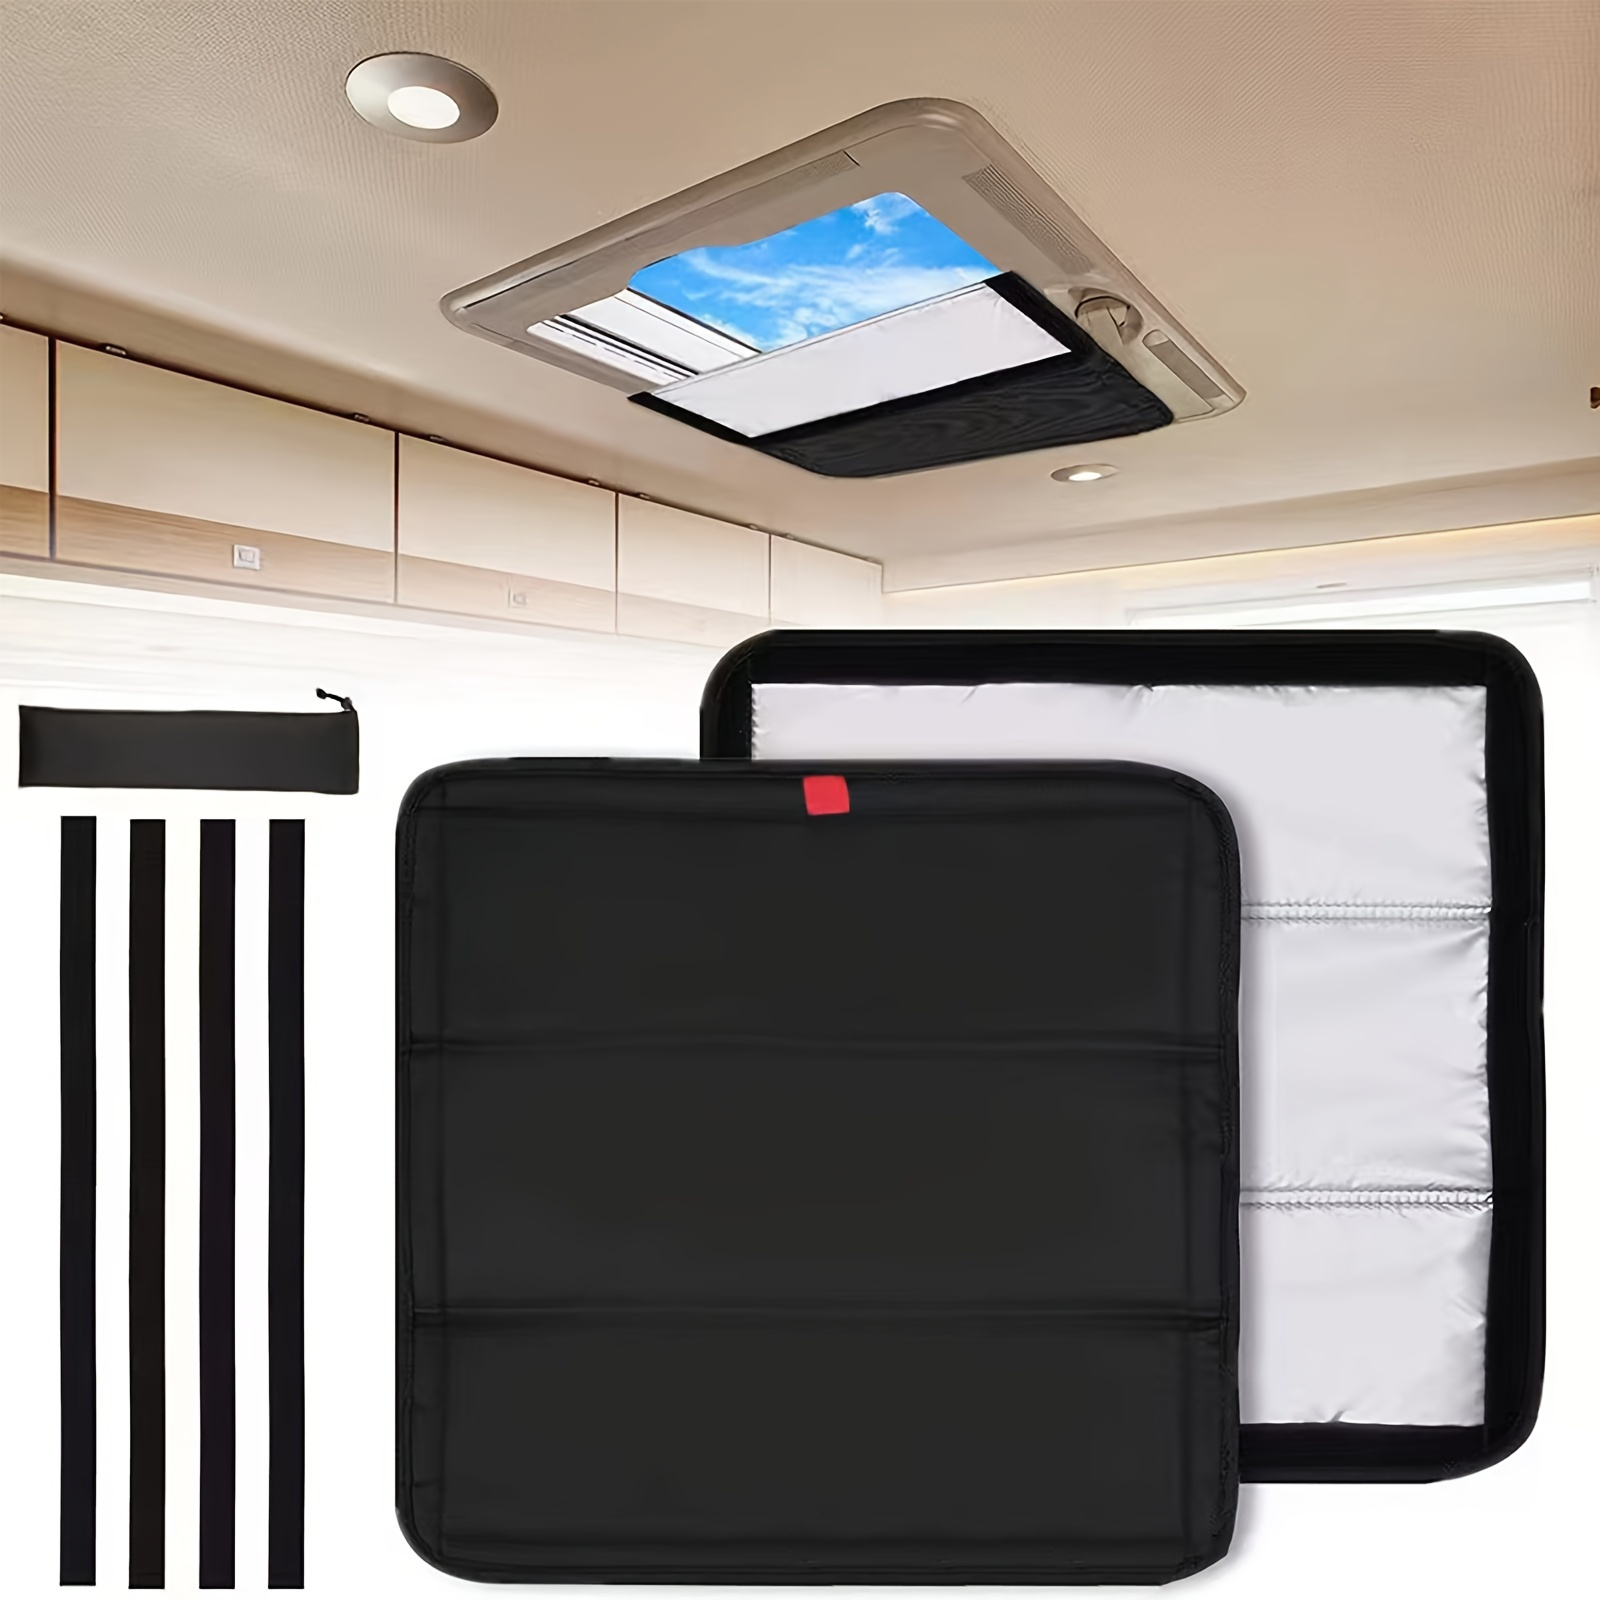 

Rv Sky Curtain Sunshade - Blackout Blocking Air Change Window Cover For Camping Trailer, Polyester Privacy Fan Cover With Paste Style, Interior & Exterior Use